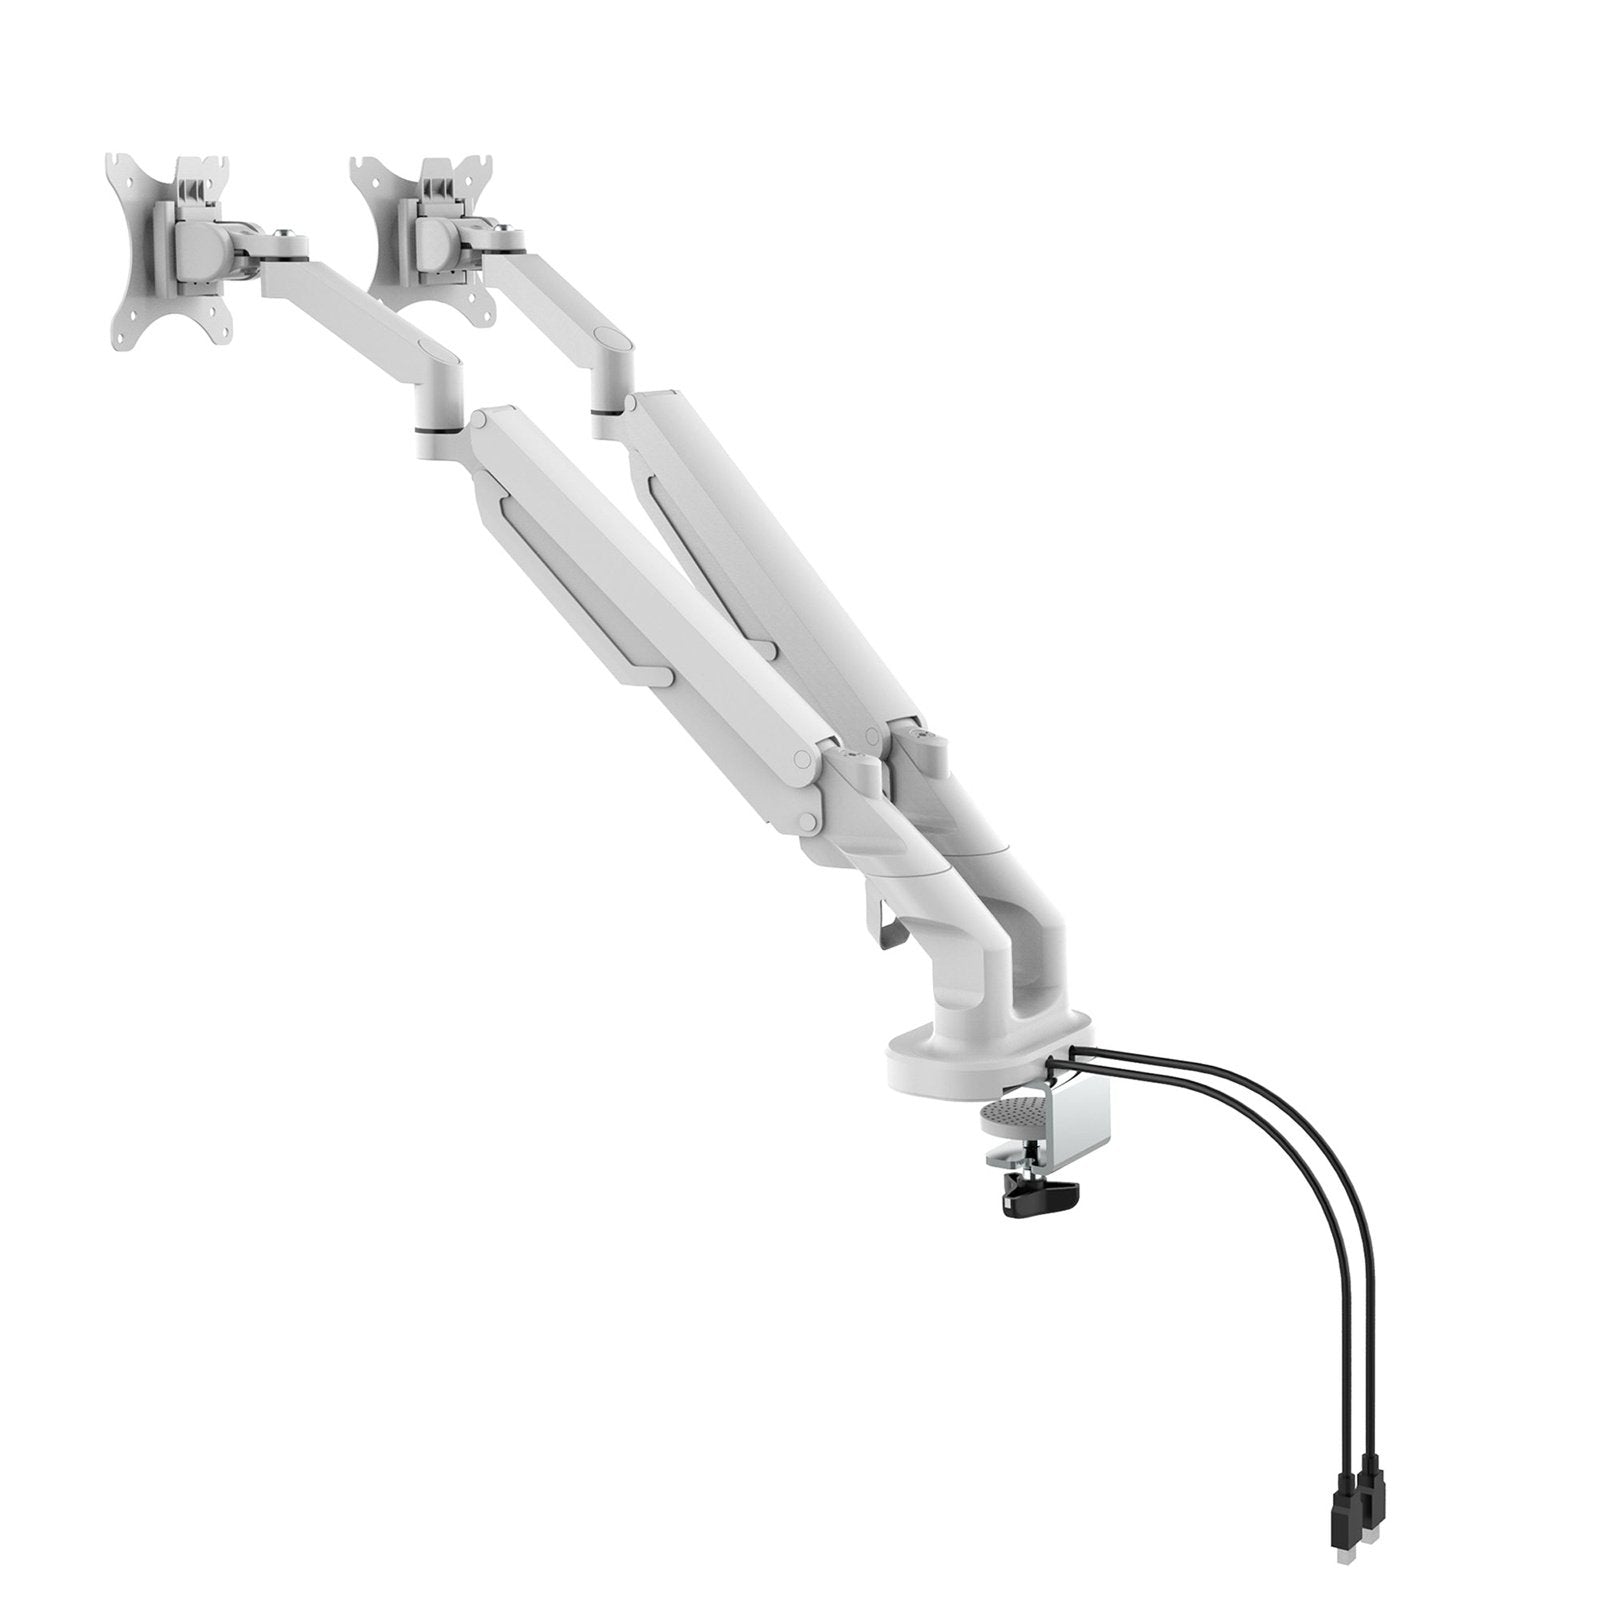 Triton gas lift space-saving double monitor arm - Office Products Online